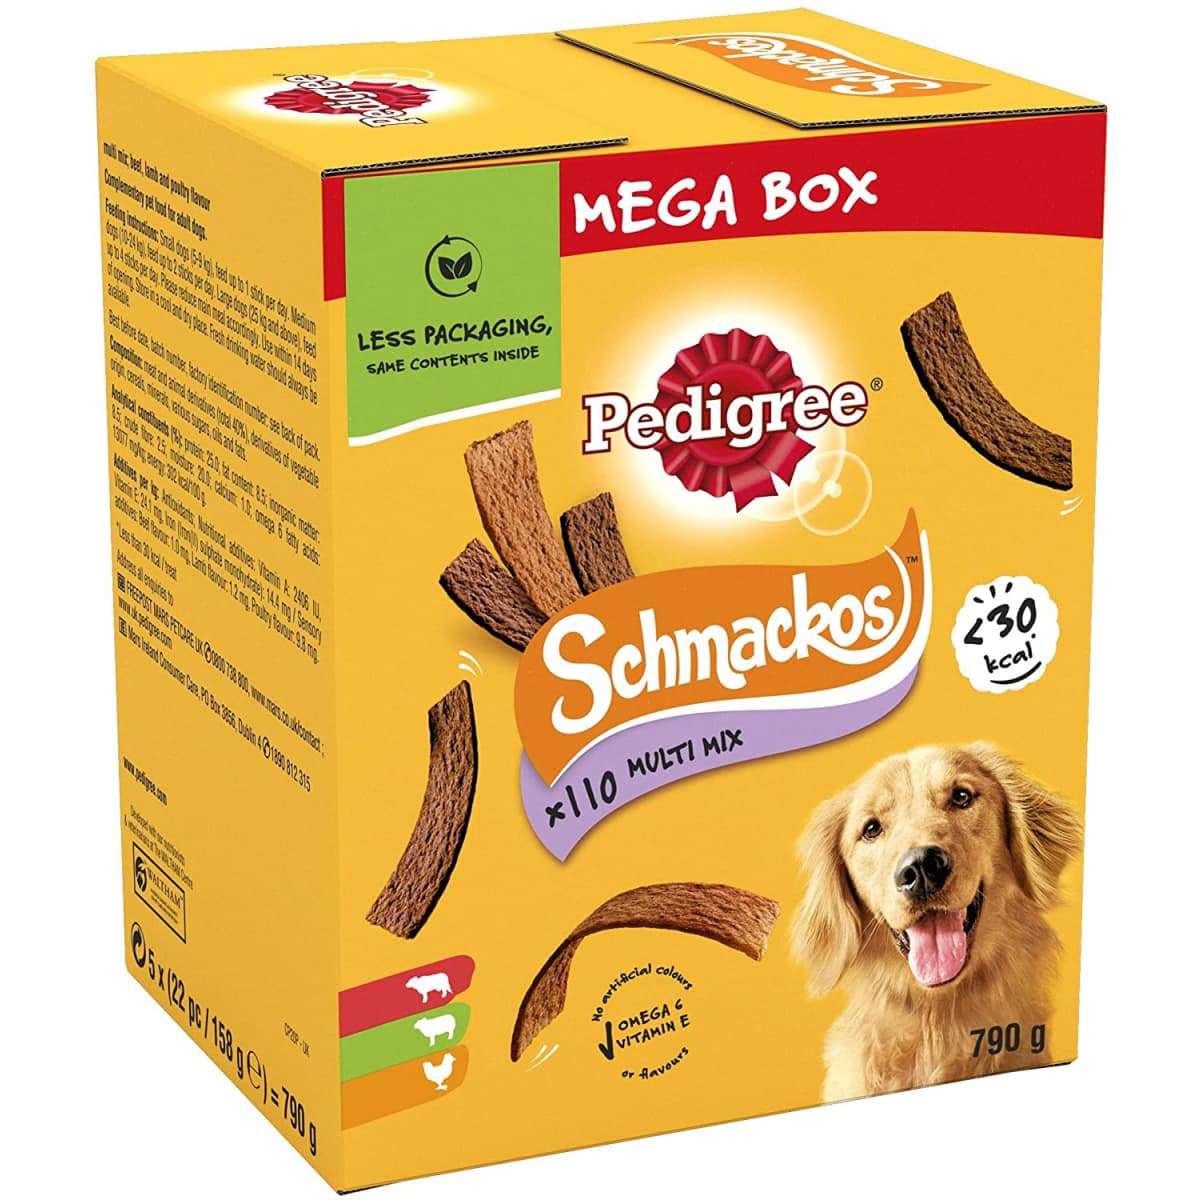 Pedigree Schmackos Variety Pack – Pawfect Supplies Ltd Product Image